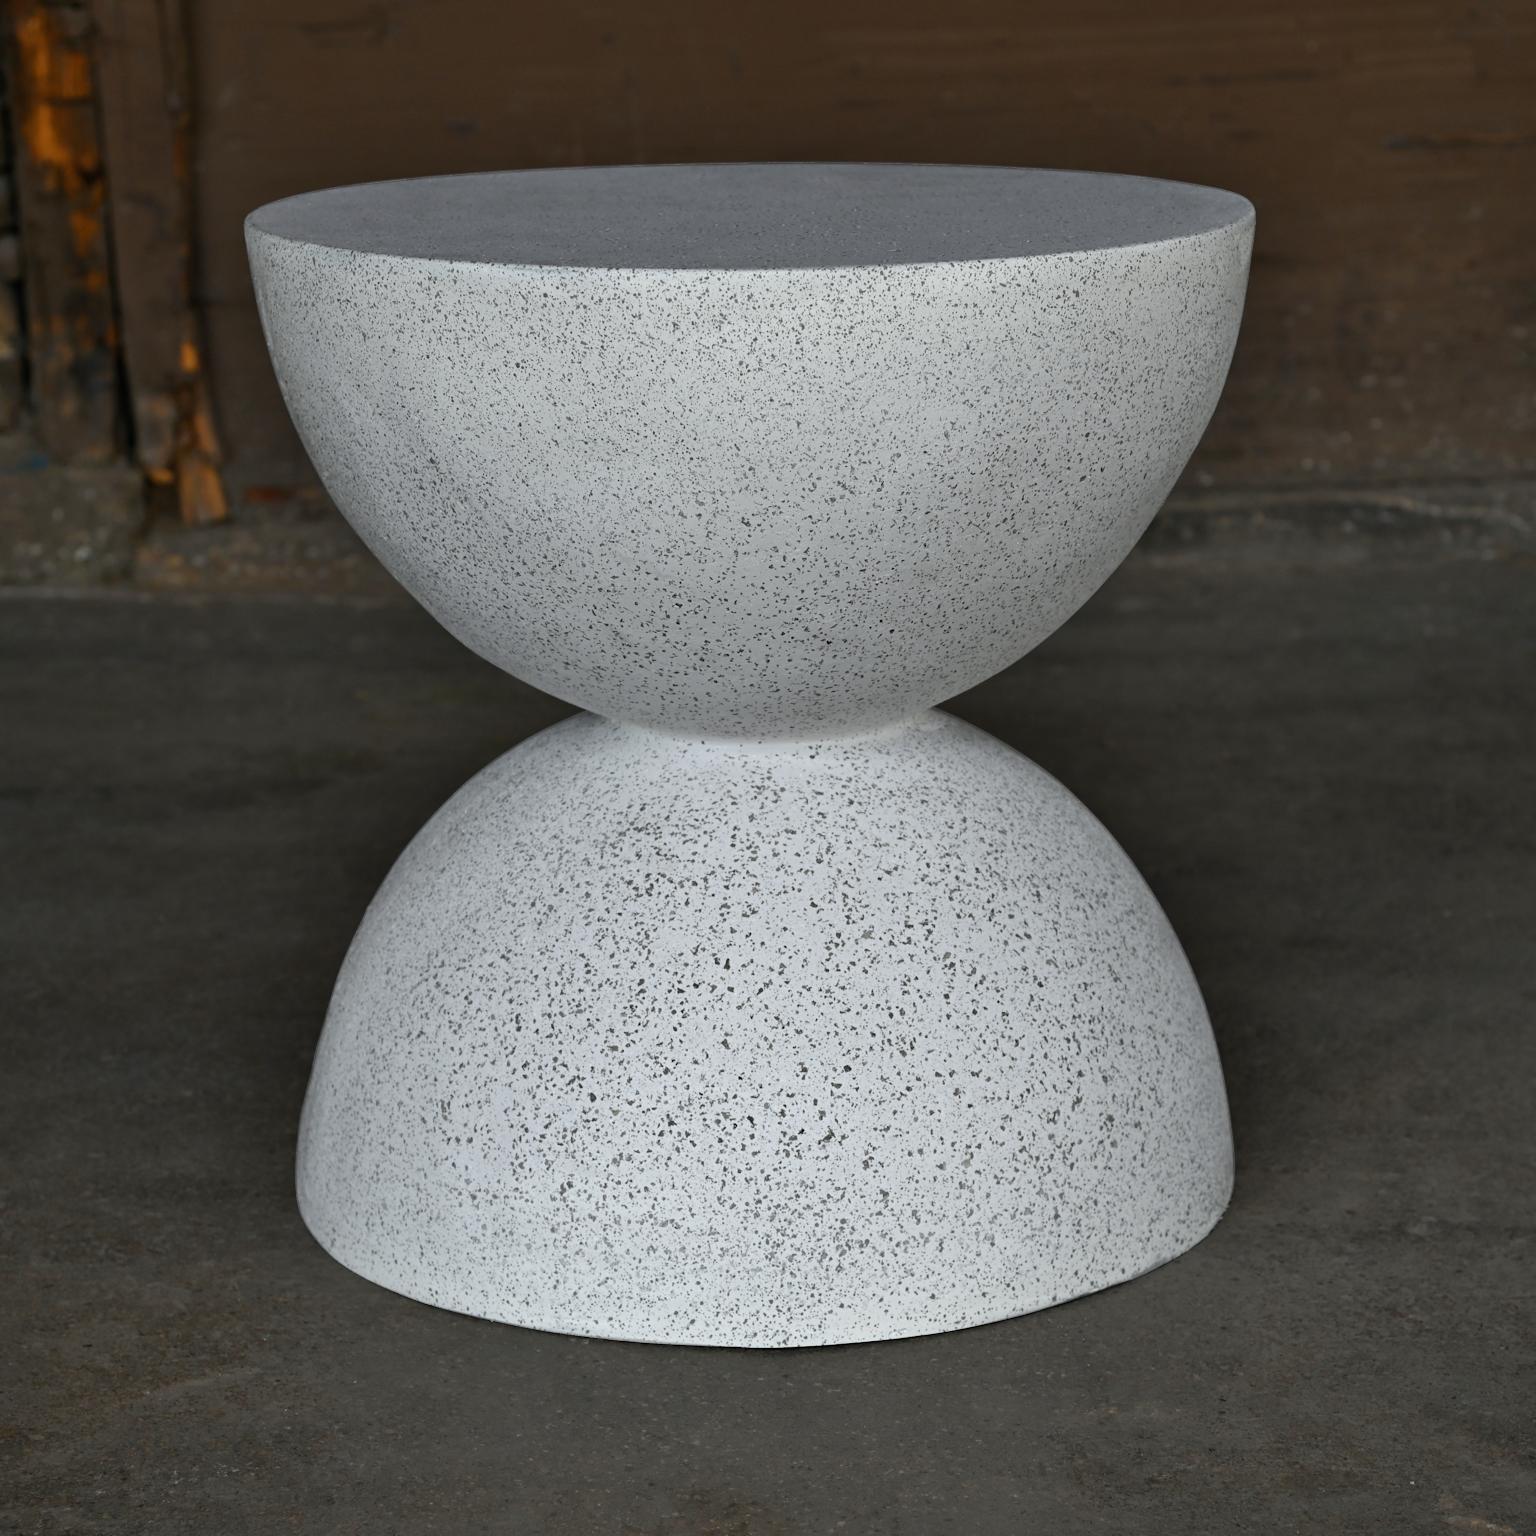 A symmetrical sculptural balance of elegance and function. 

Dimensions: Diameter 15 in. (38 cm), height 16 in. (40.6 cm). Weight 20 lbs. (9 kg)

Finish color options:
white stone
natural stone (shown)
aged stone
keystone
coal stone

Materials: